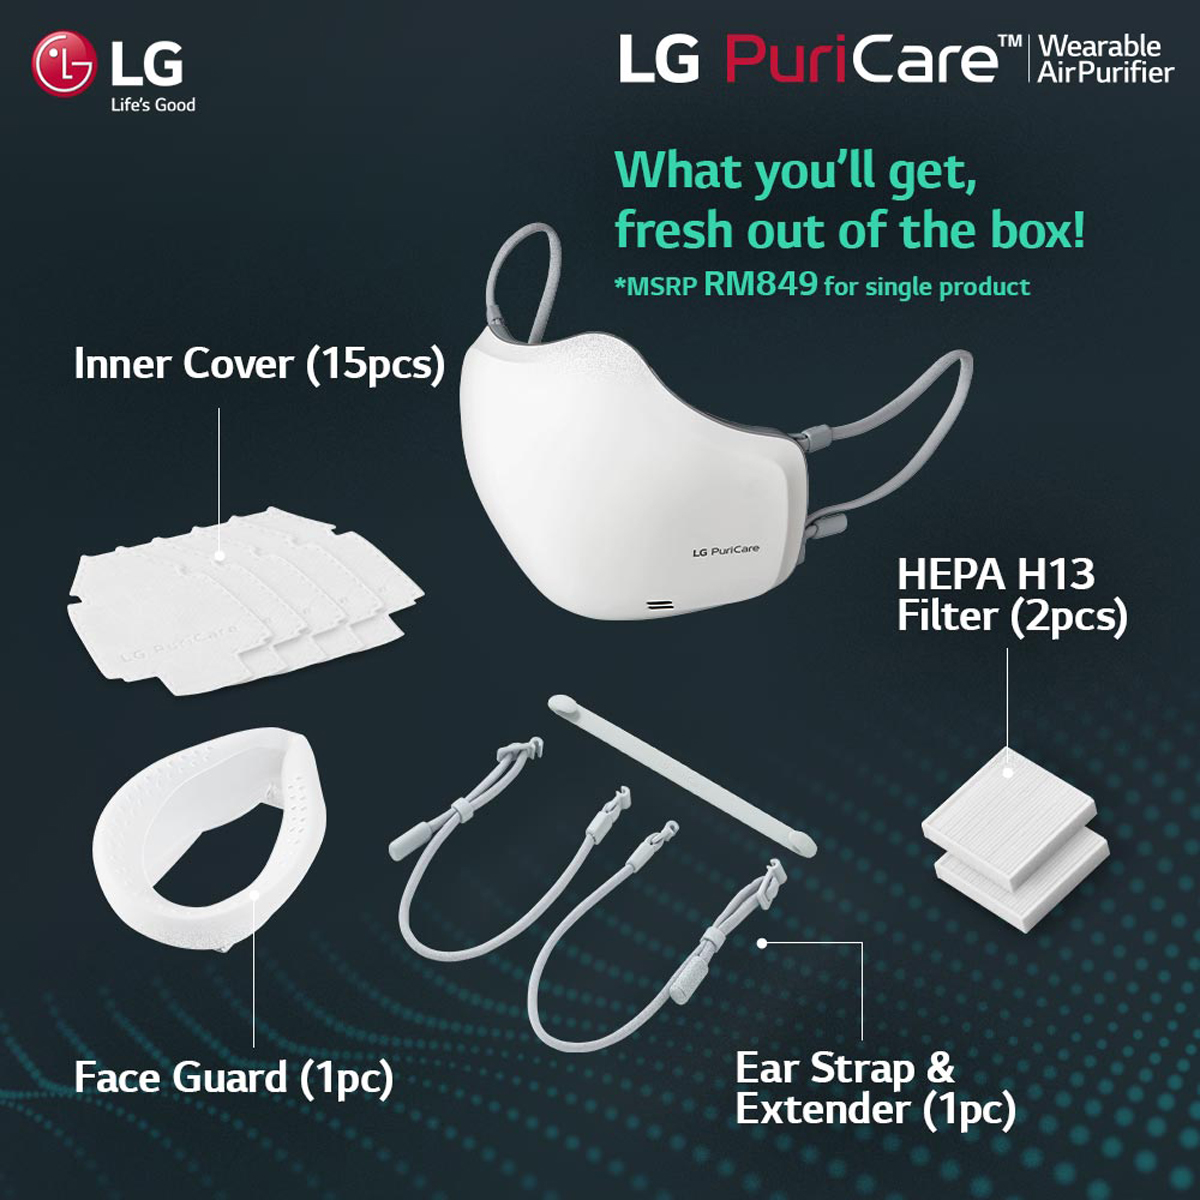 LG PuriCare Wearable Air Purifier Mask Malaysia Pre-order